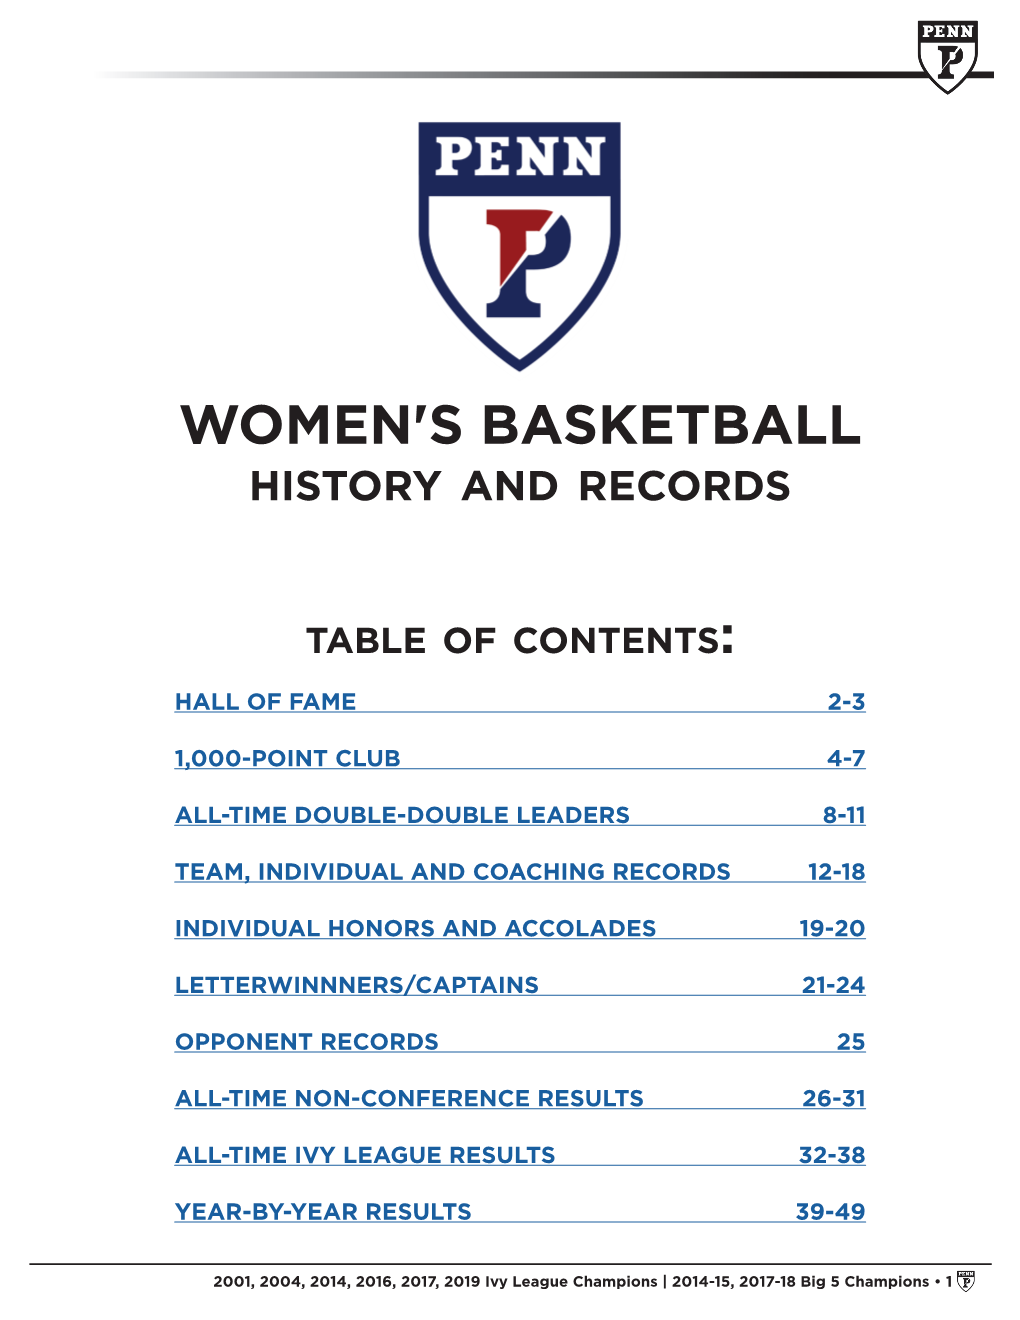 WOMEN's BASKETBALL History and Records